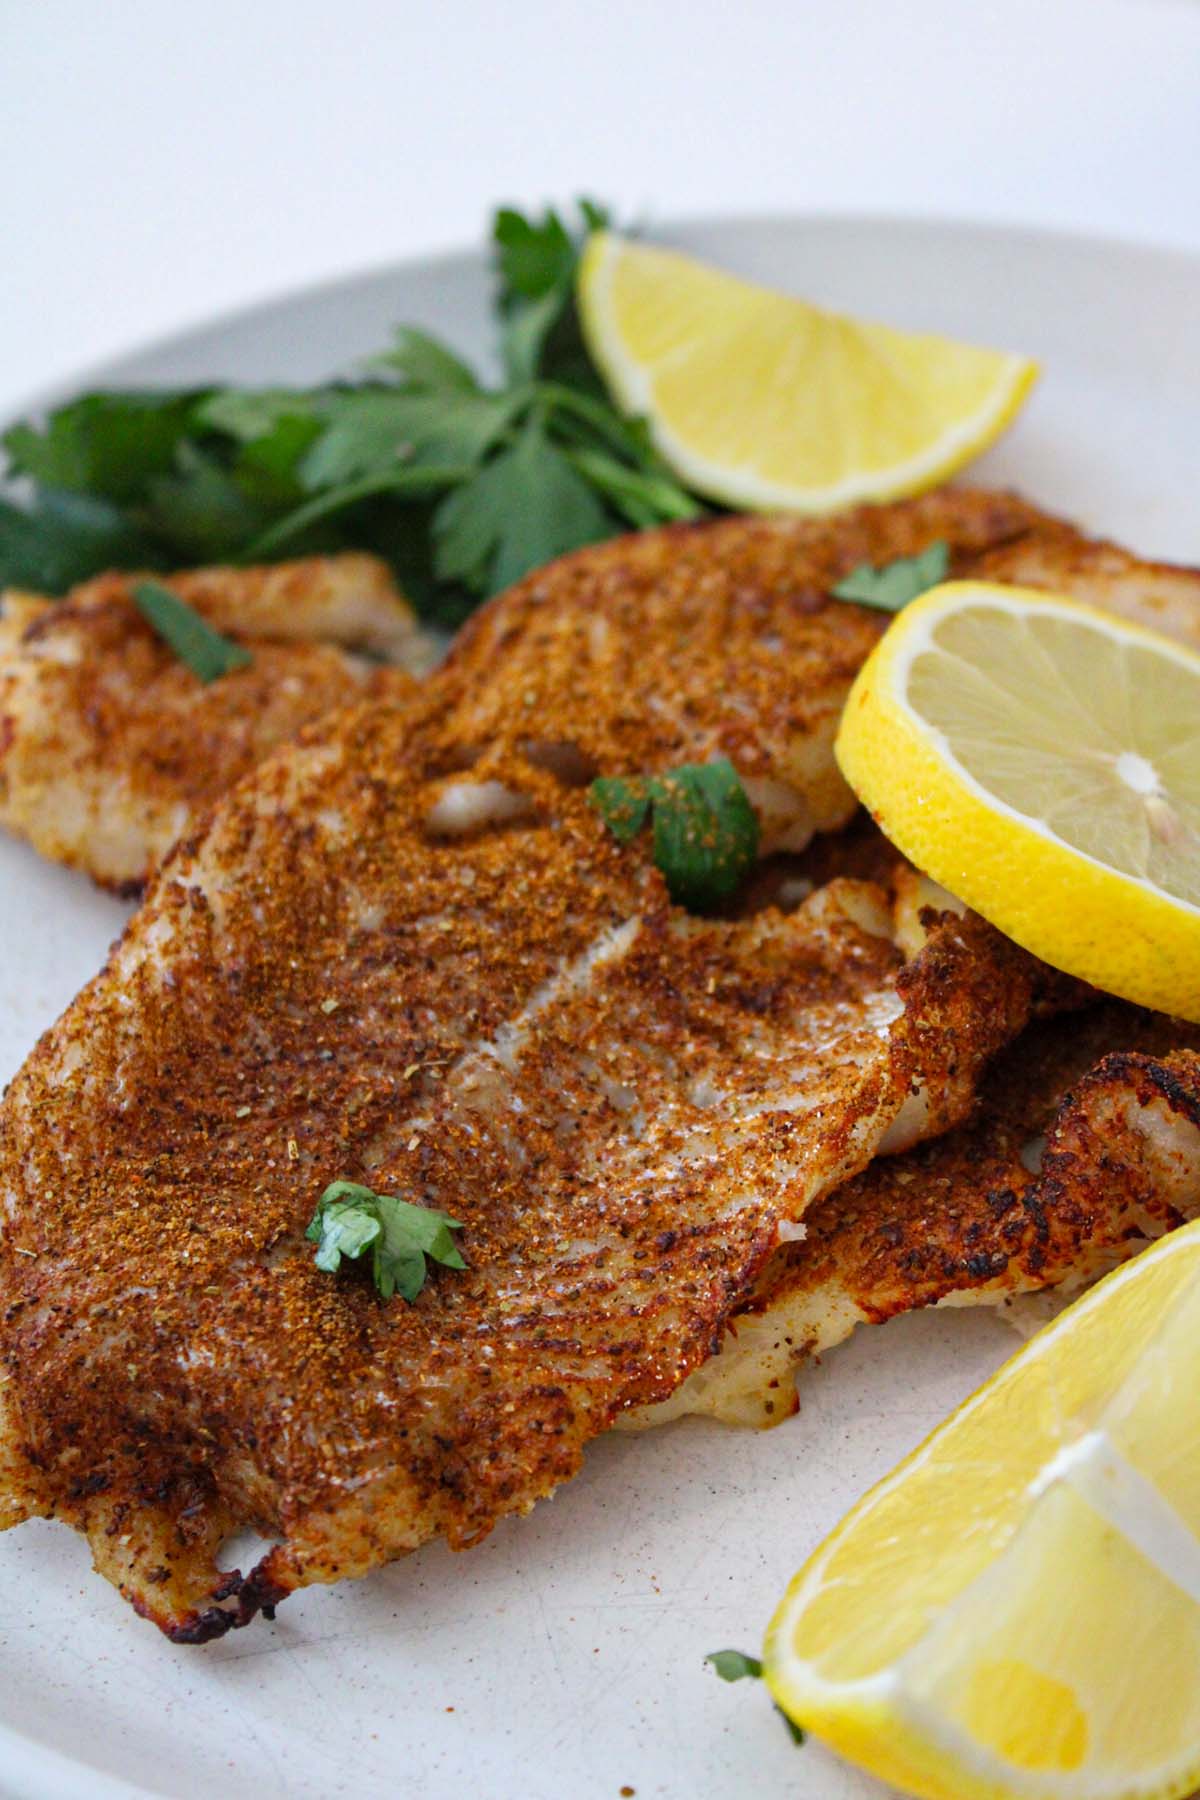 A low carb and keto friendly air fryer cod fish recipe